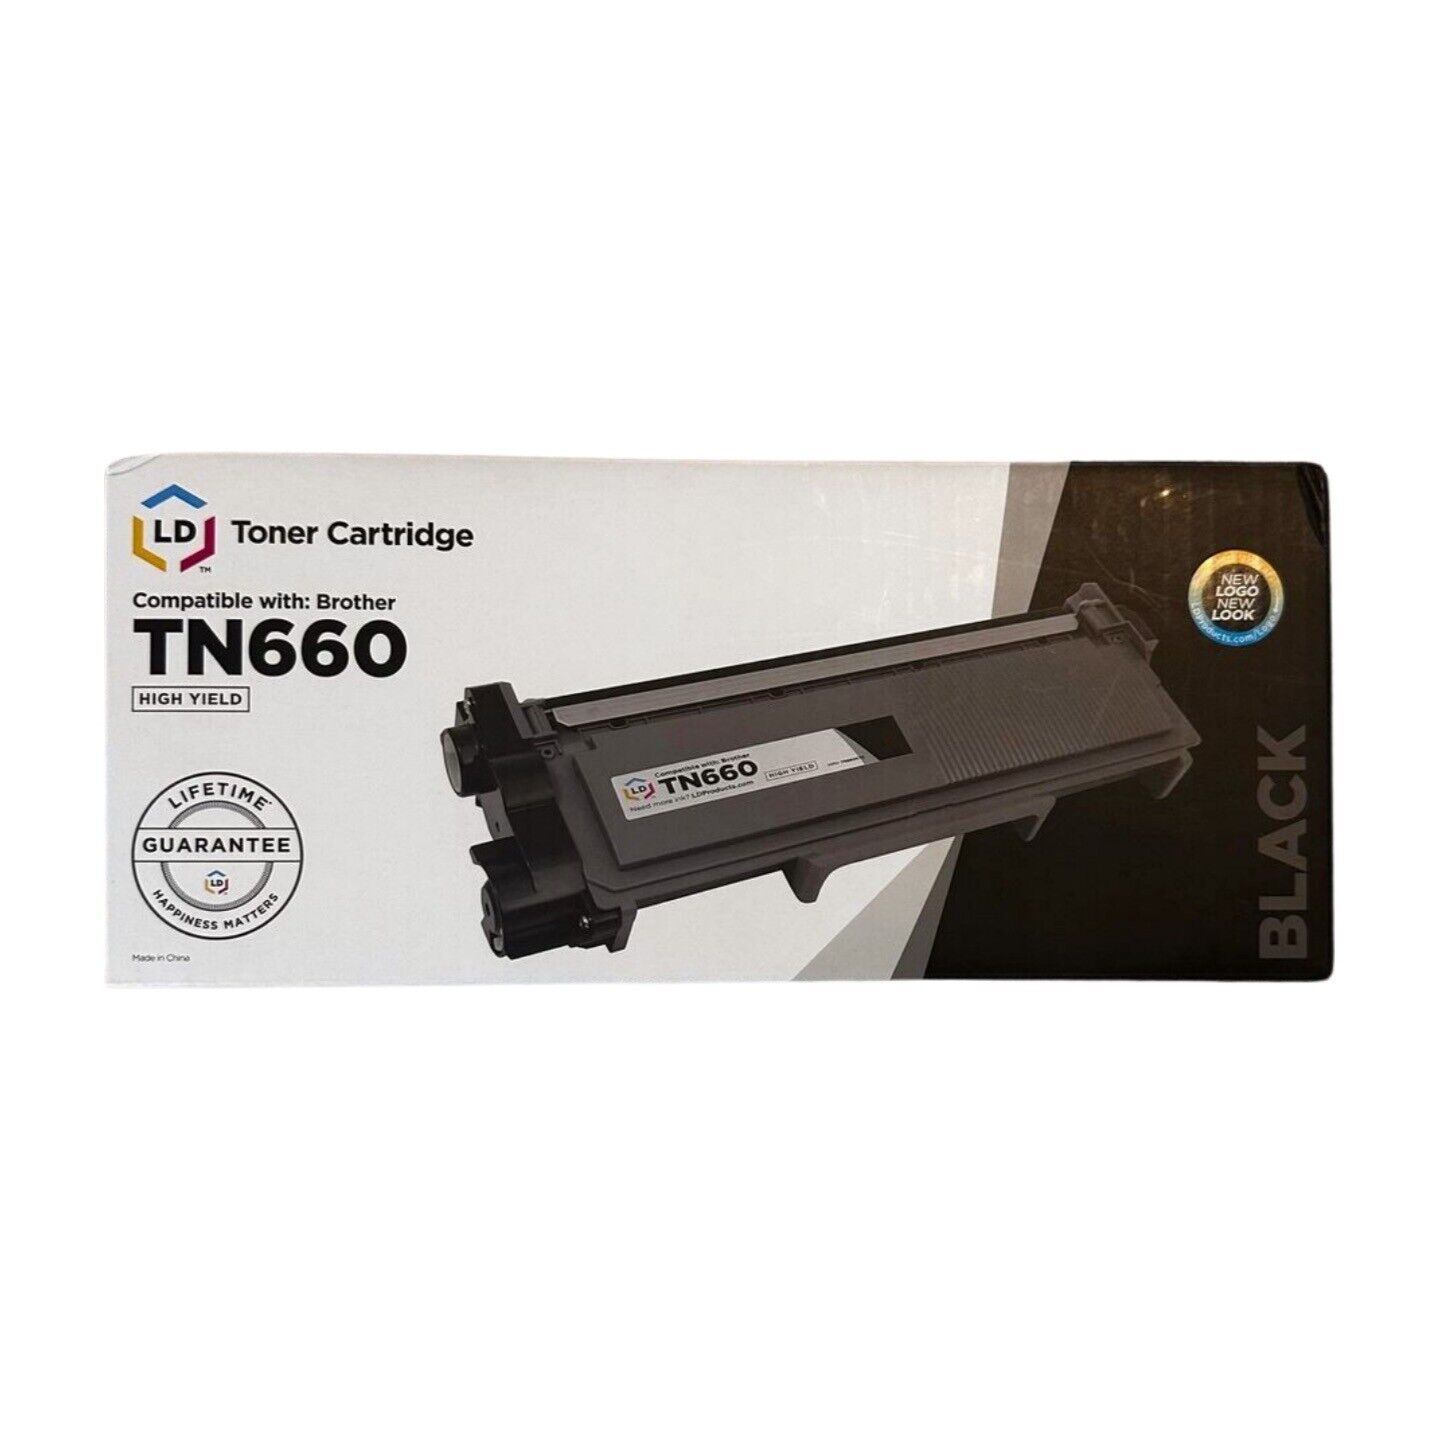 LD TN660 Toner Cartridge - Black - Replacement For Brother Printers - New